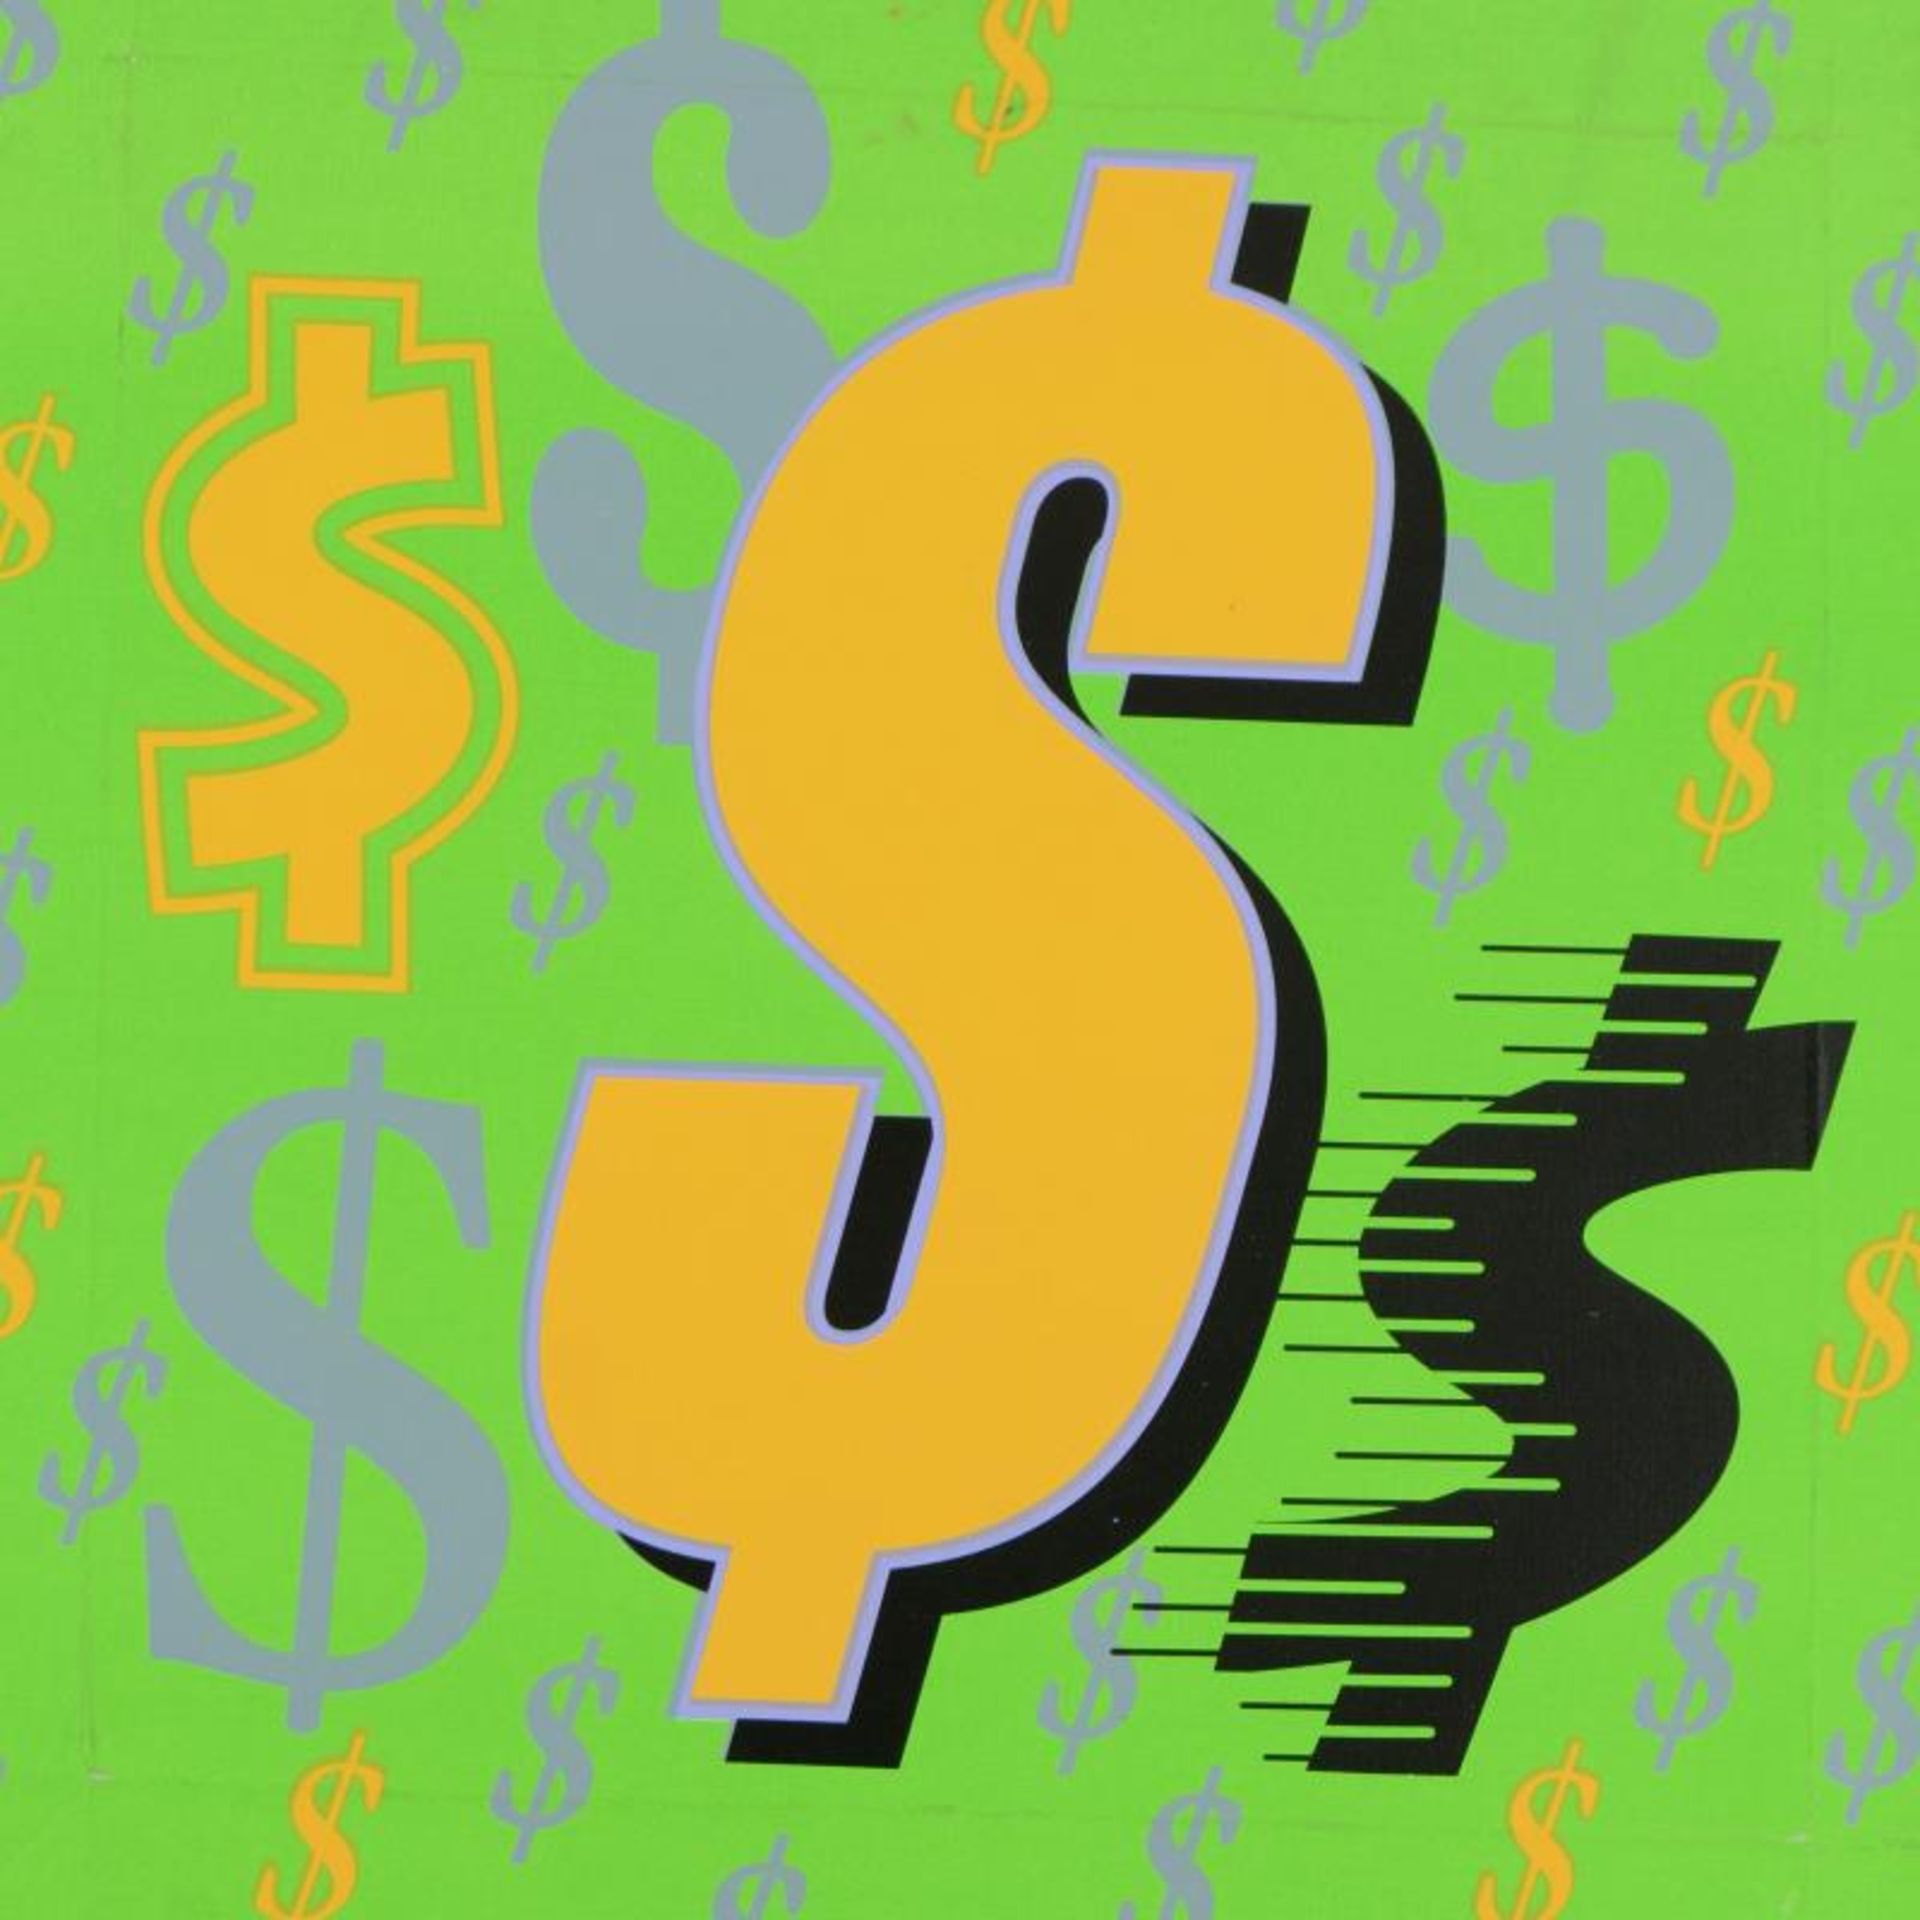 Dollar Signs (Green Italic) by Steve Kaufman (1960-2010) - Image 2 of 3